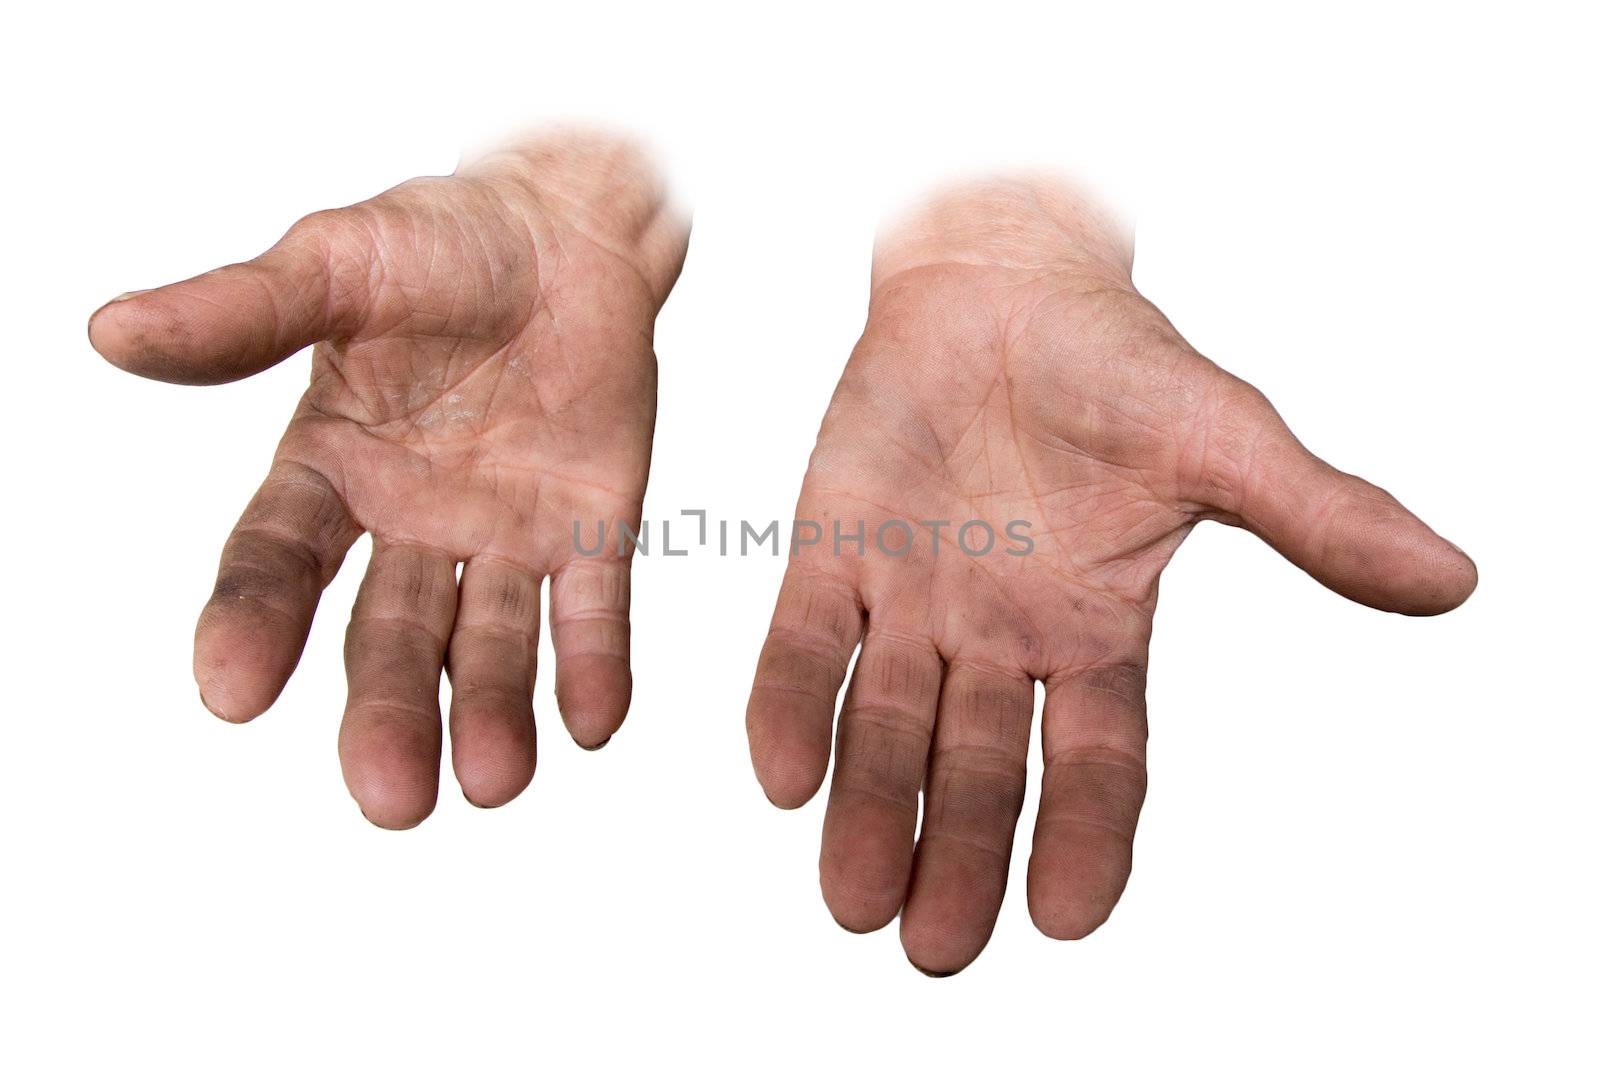 dirty hands of her grandmother on a white background by schankz